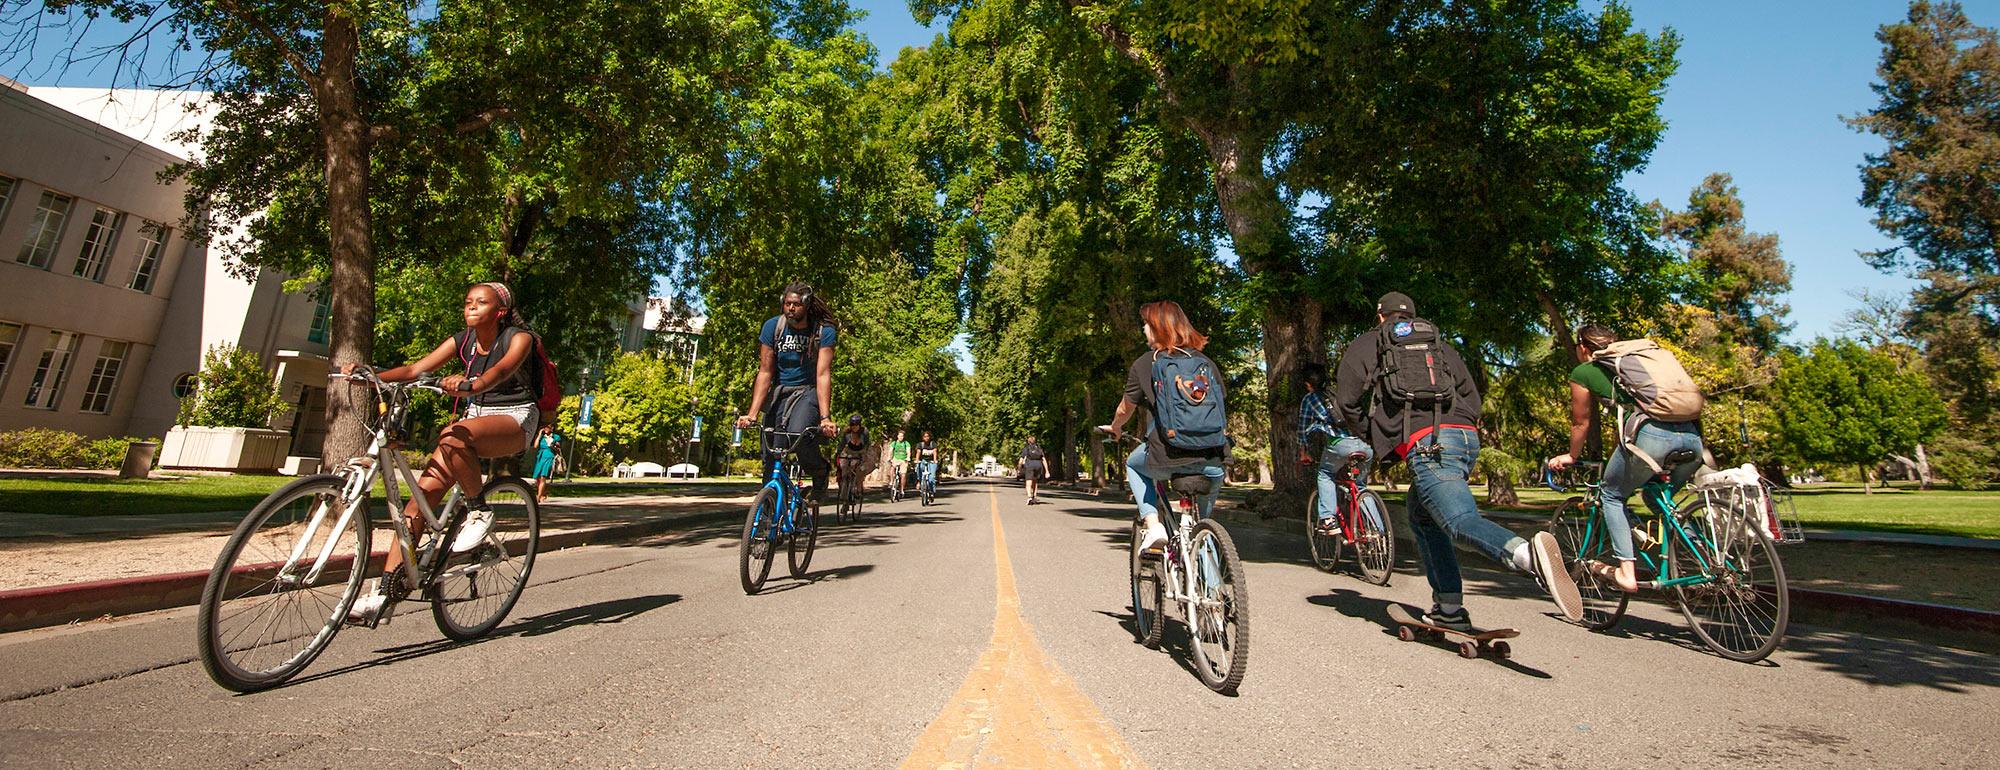 Students riding bicycles on west quad ϲʿͼ